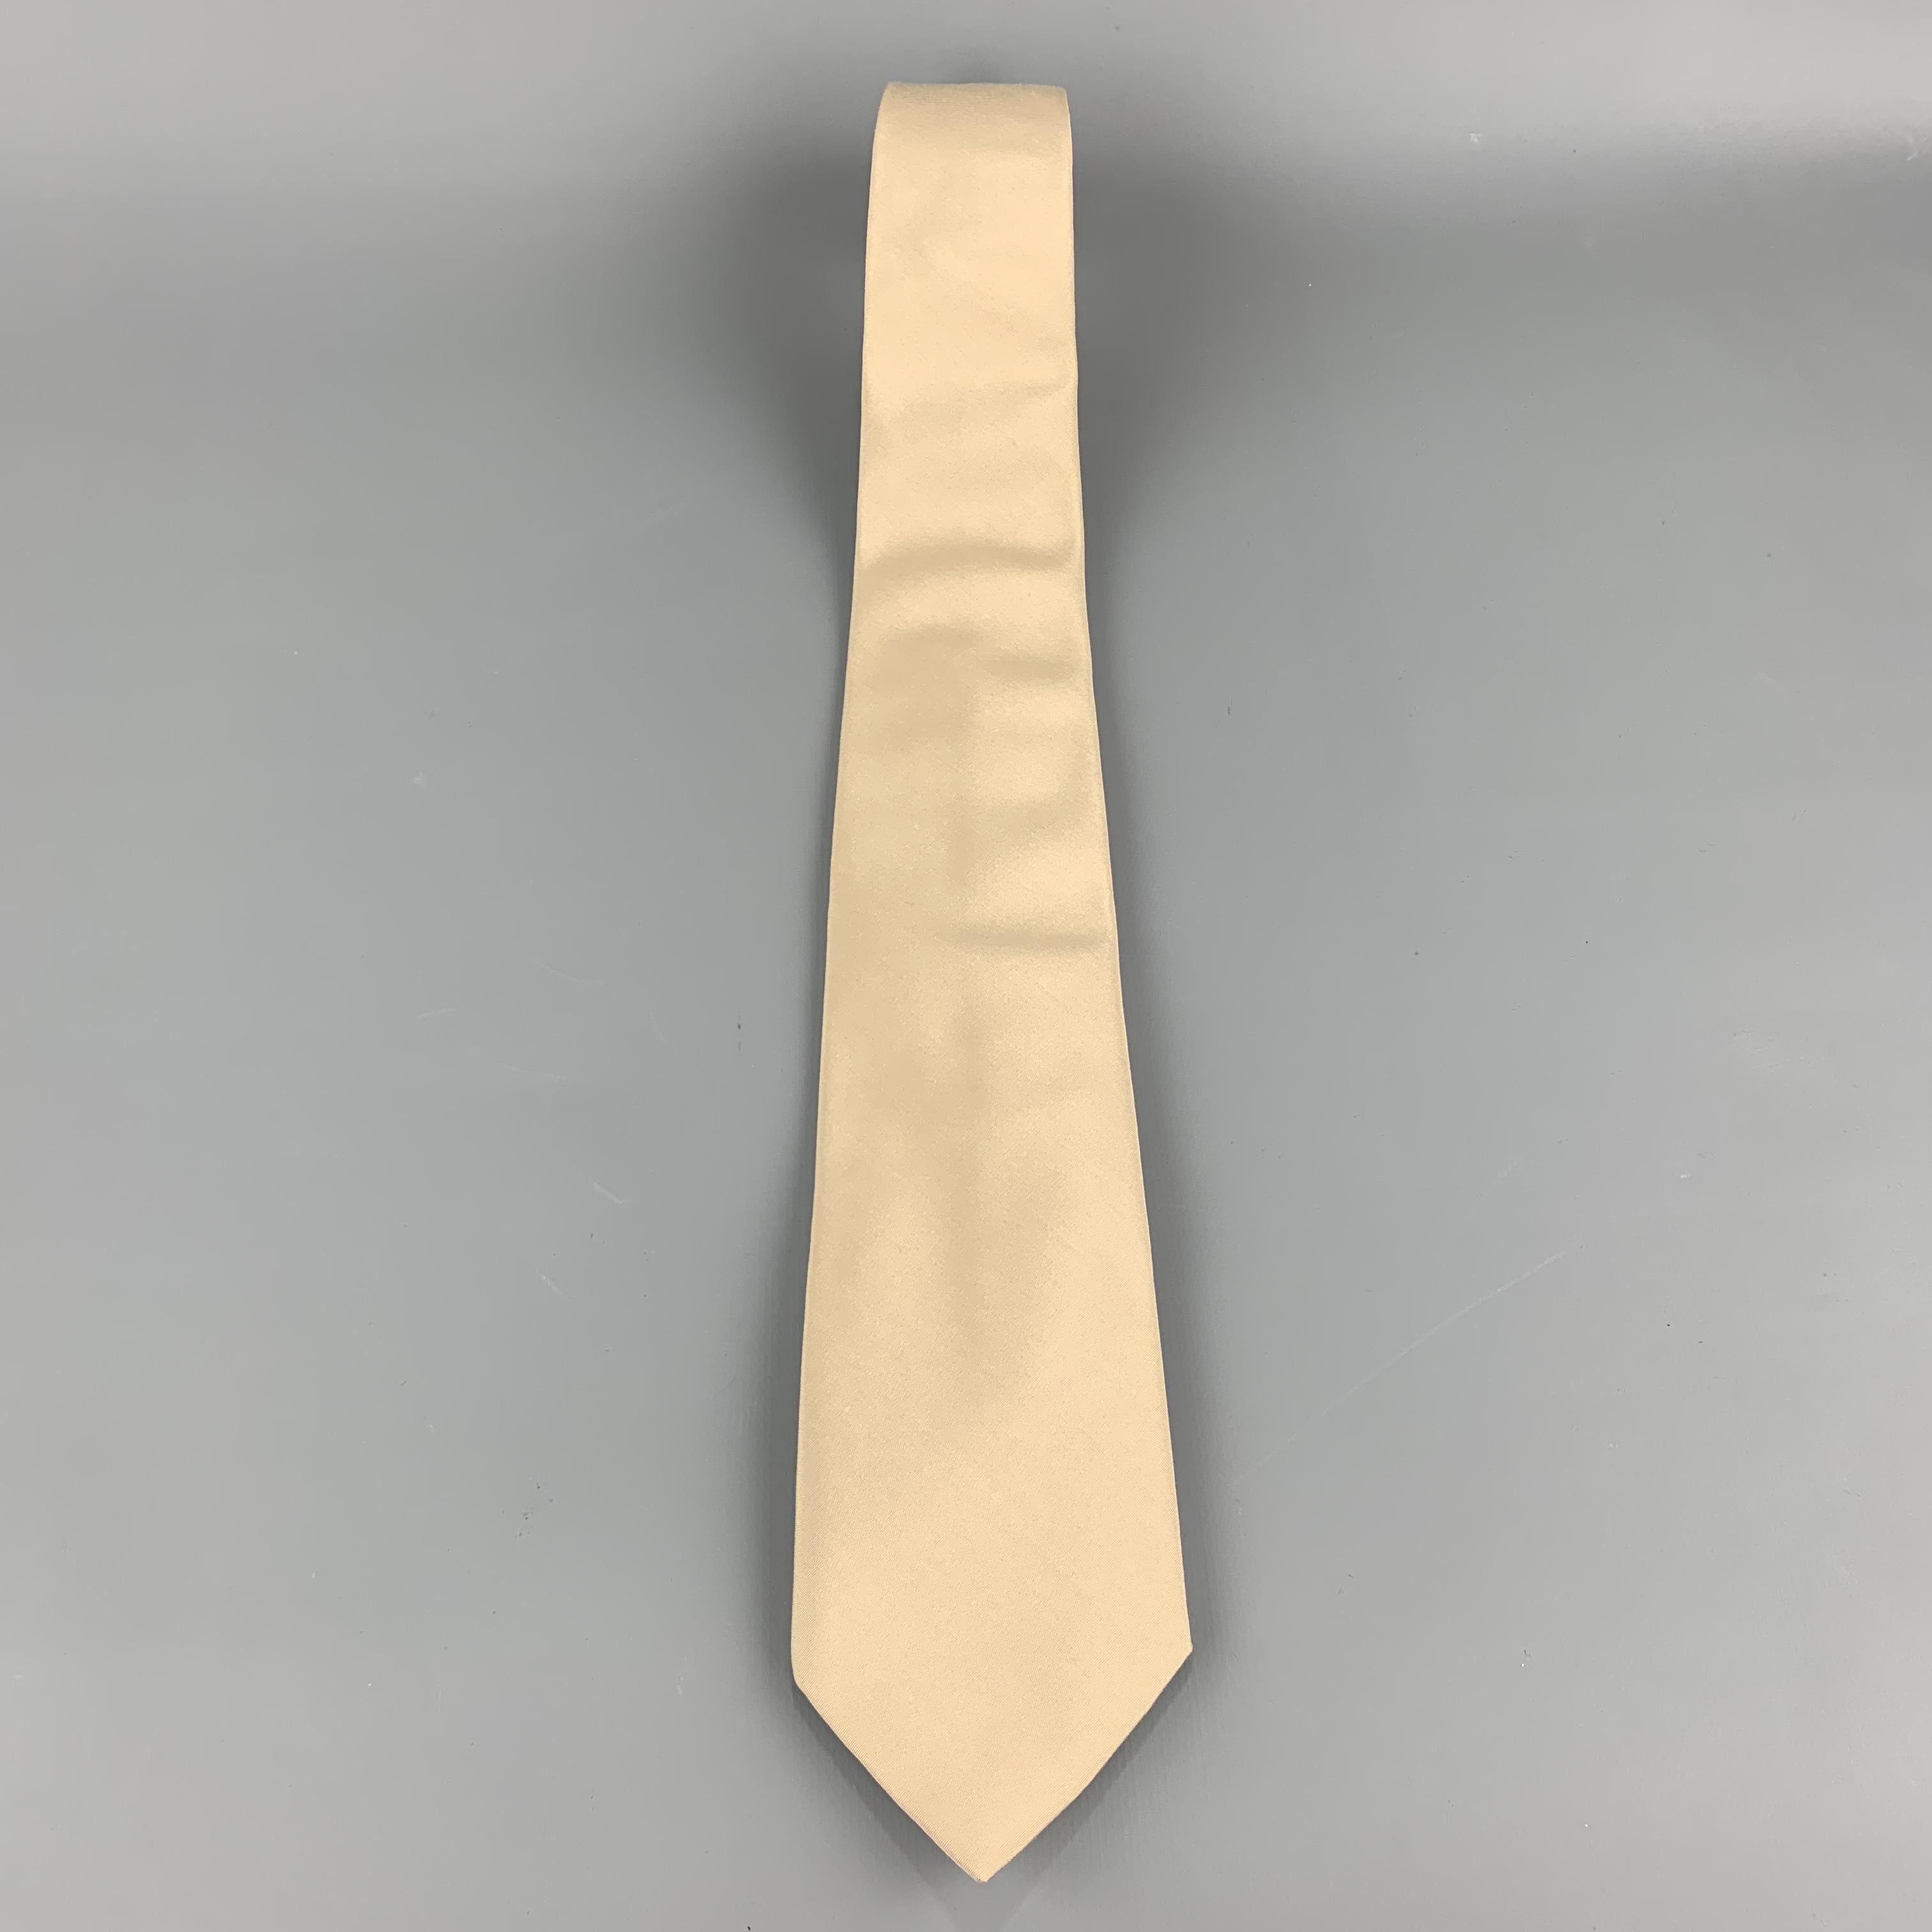 HELMUT LANG necktie comes in khaki beige silk with a slim cut. Hand Made in Italy.

Excellent Pre-Owned Condition.

Width: 2.75 in.